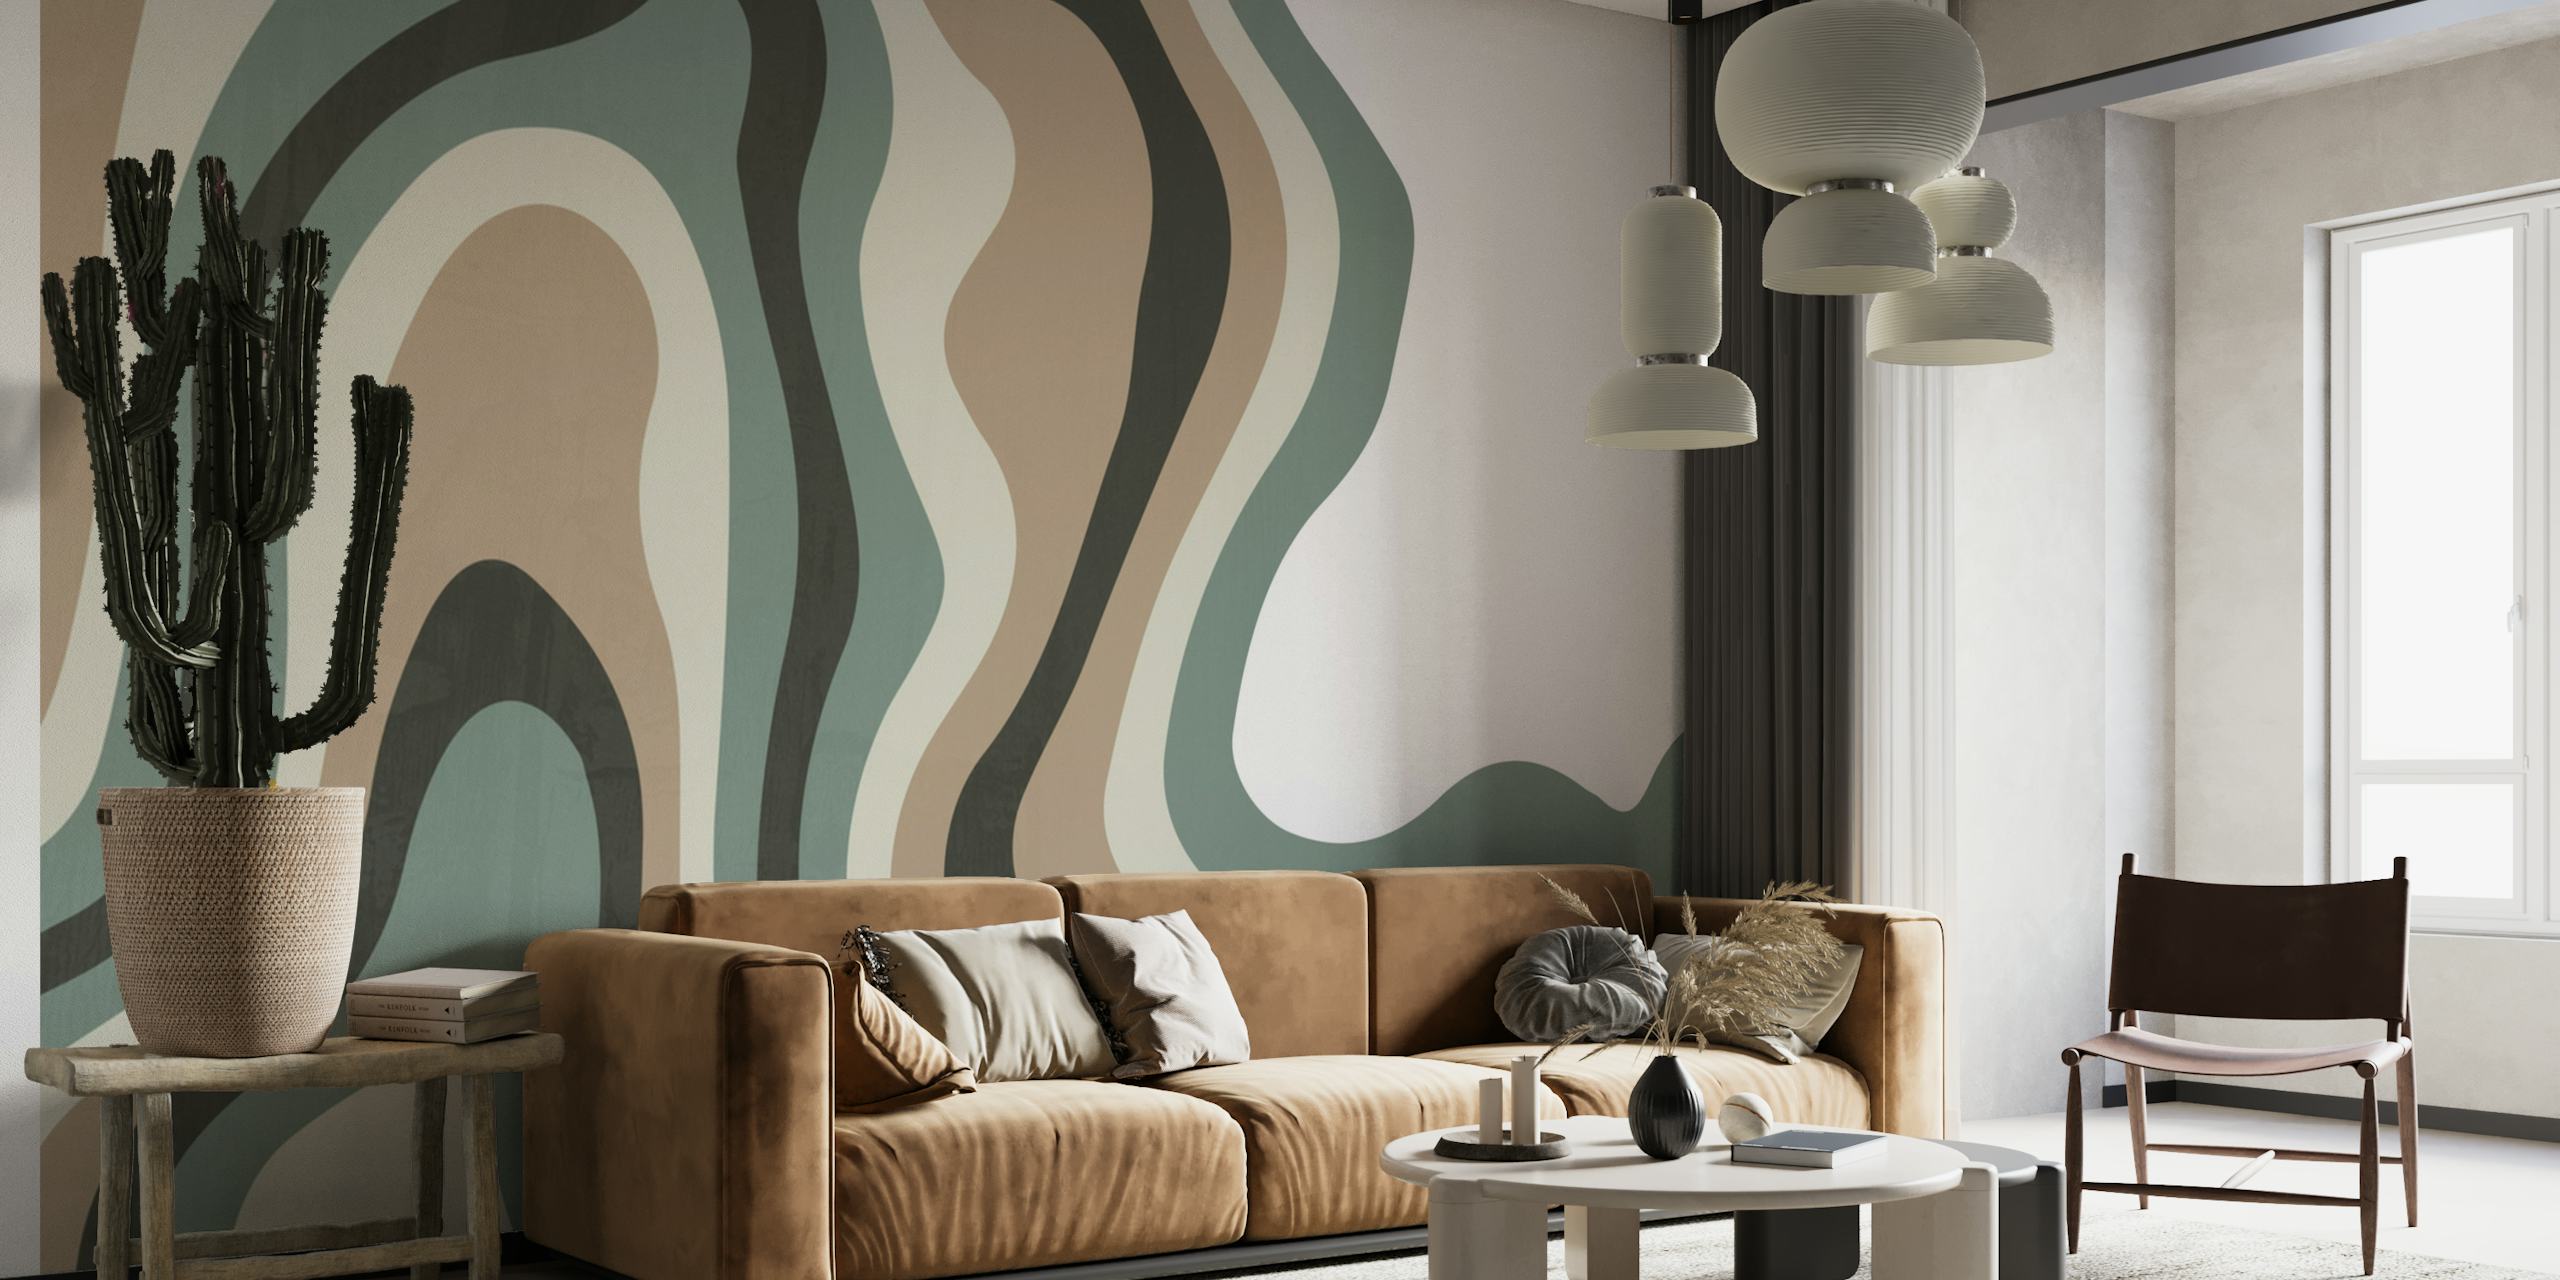 Abstract Organic VII wall mural with fluid shapes in green, taupe, and black